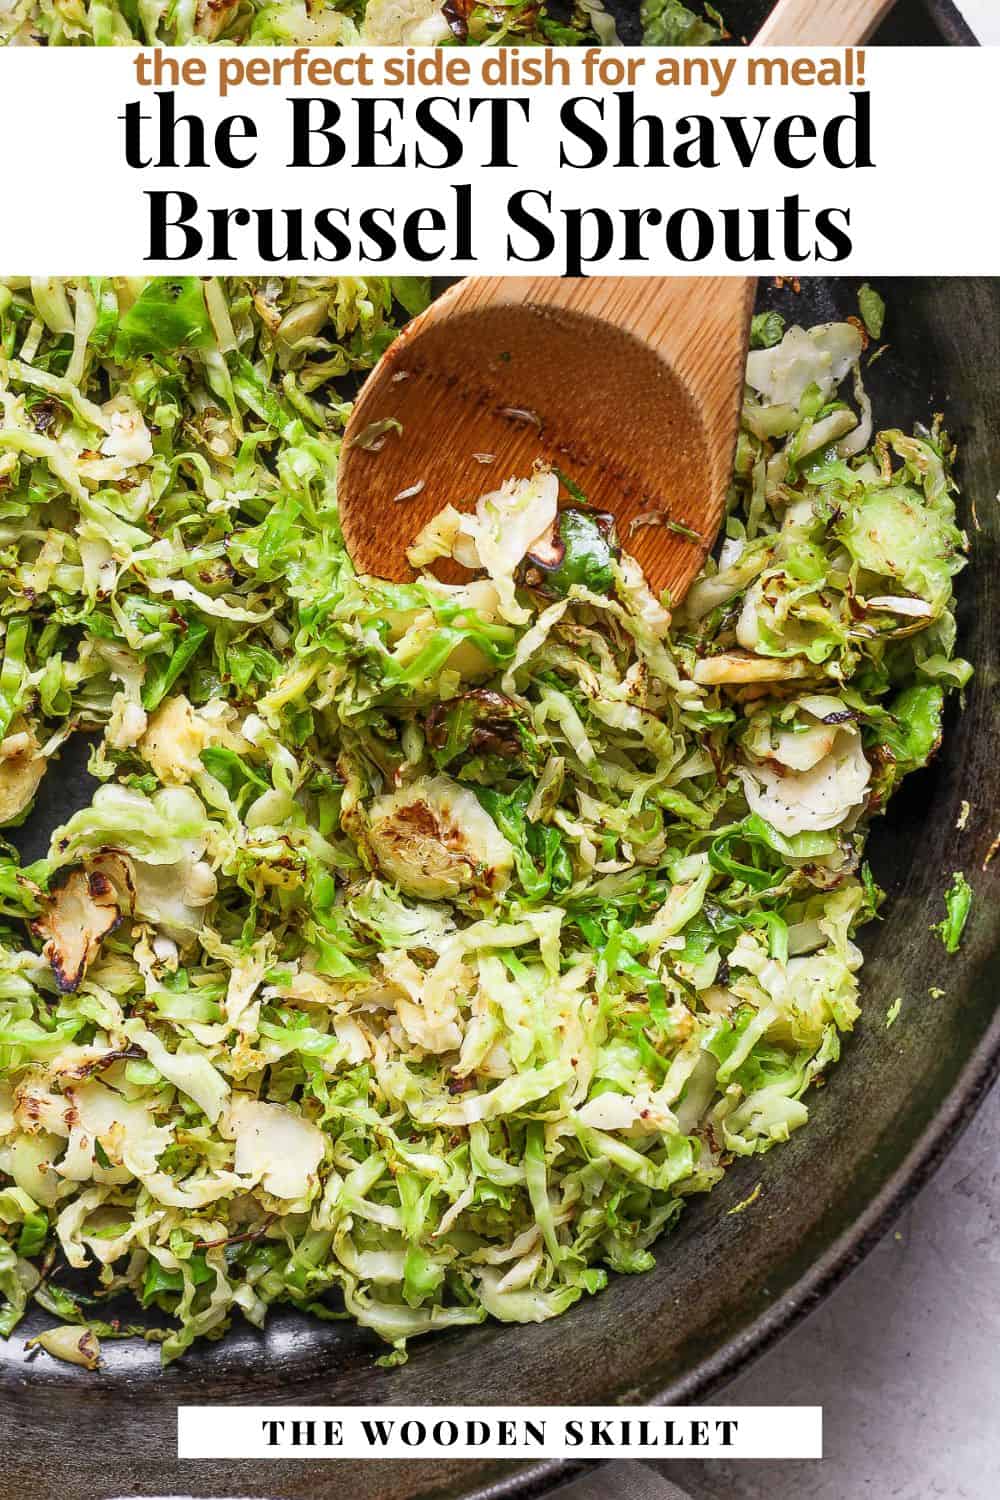 Pinterest image for shaved brussel sprouts.